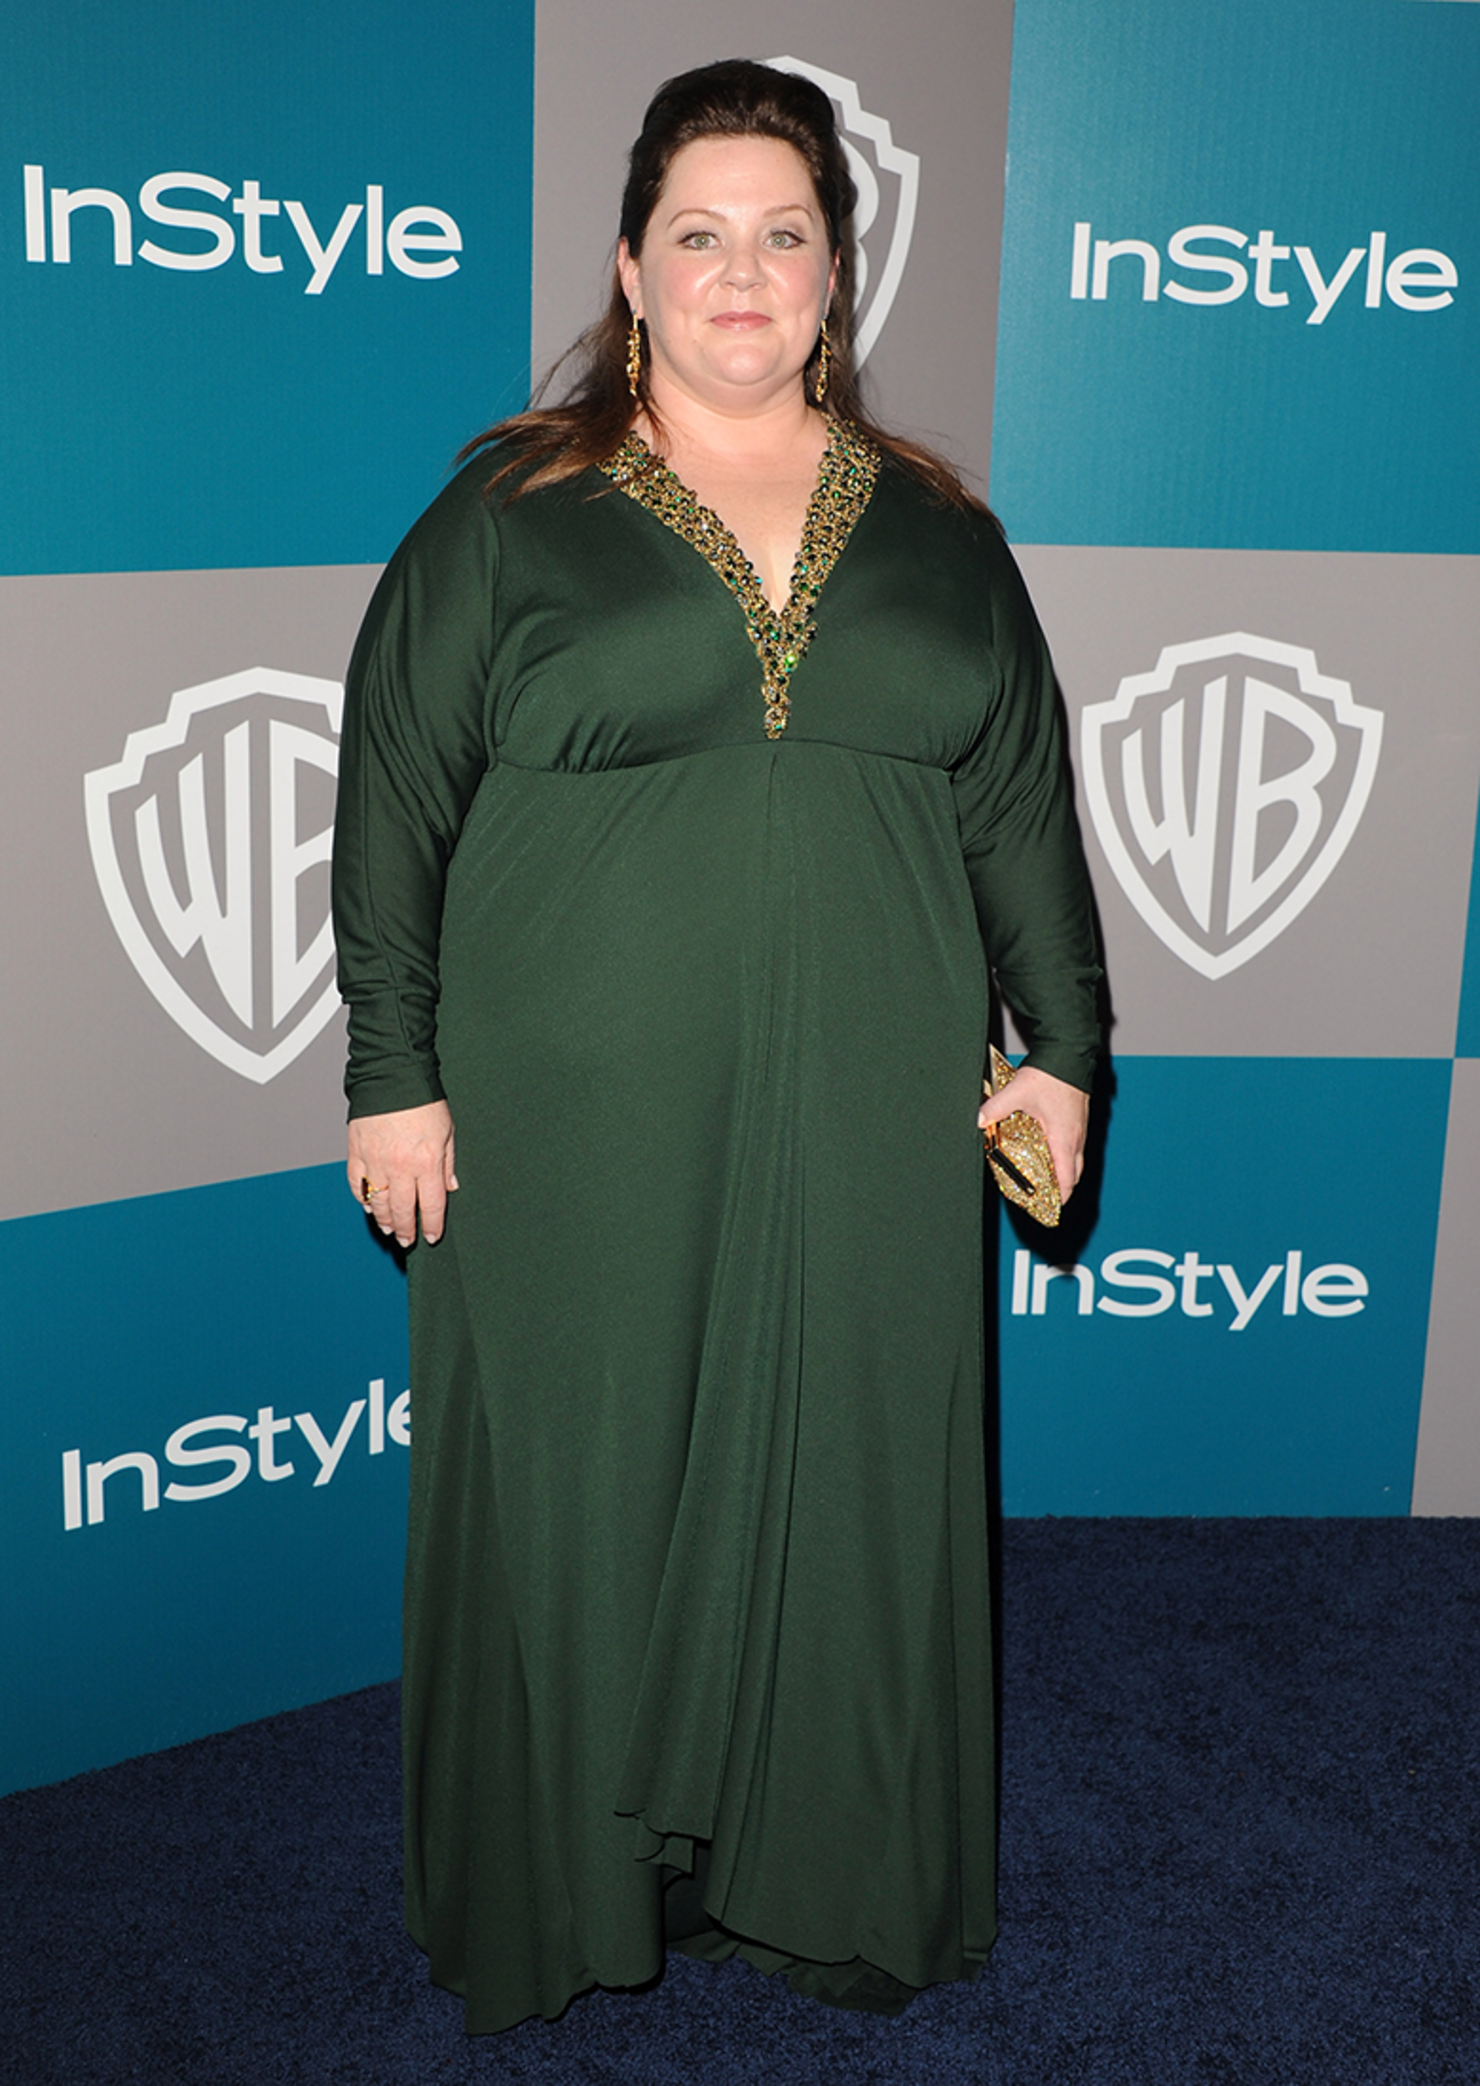 Melissa McCarthy Is Unrecognizable After Stunning Weight Loss | iHeart